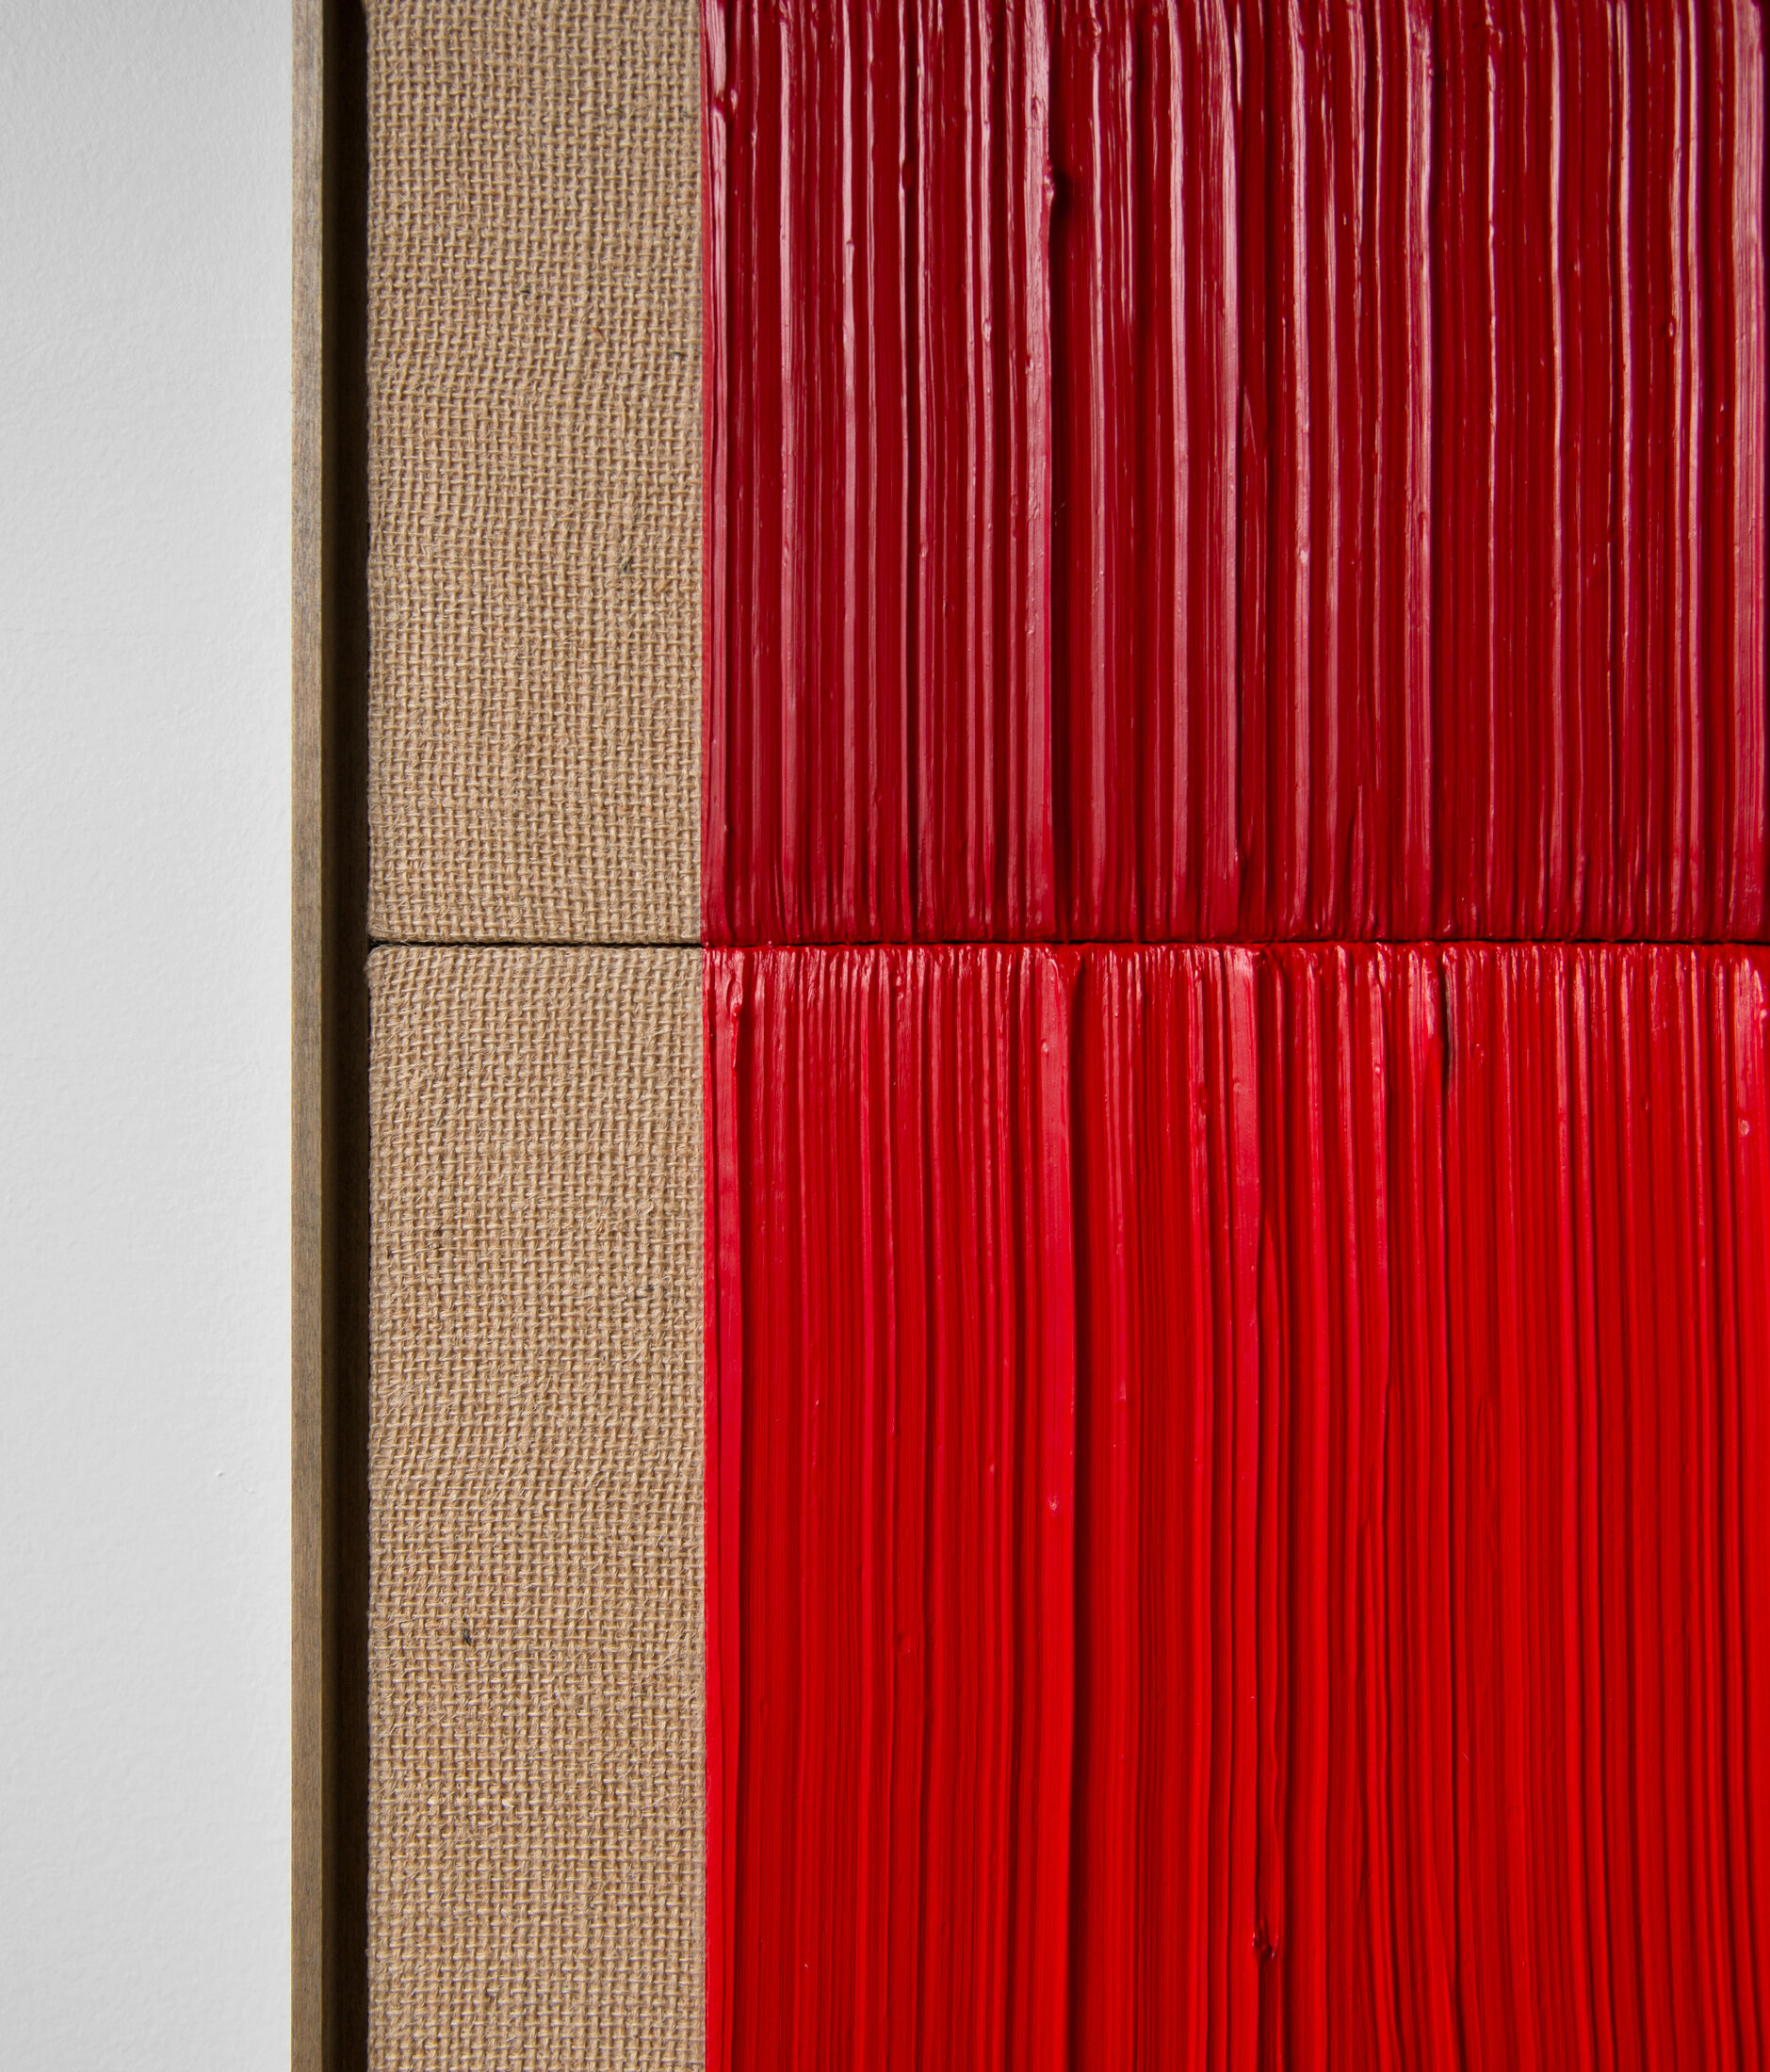  JOHNNY ABRAHAMS   (detail)  Untitled (Red) , 2020 acrylic on burlap, 16" x 12" 